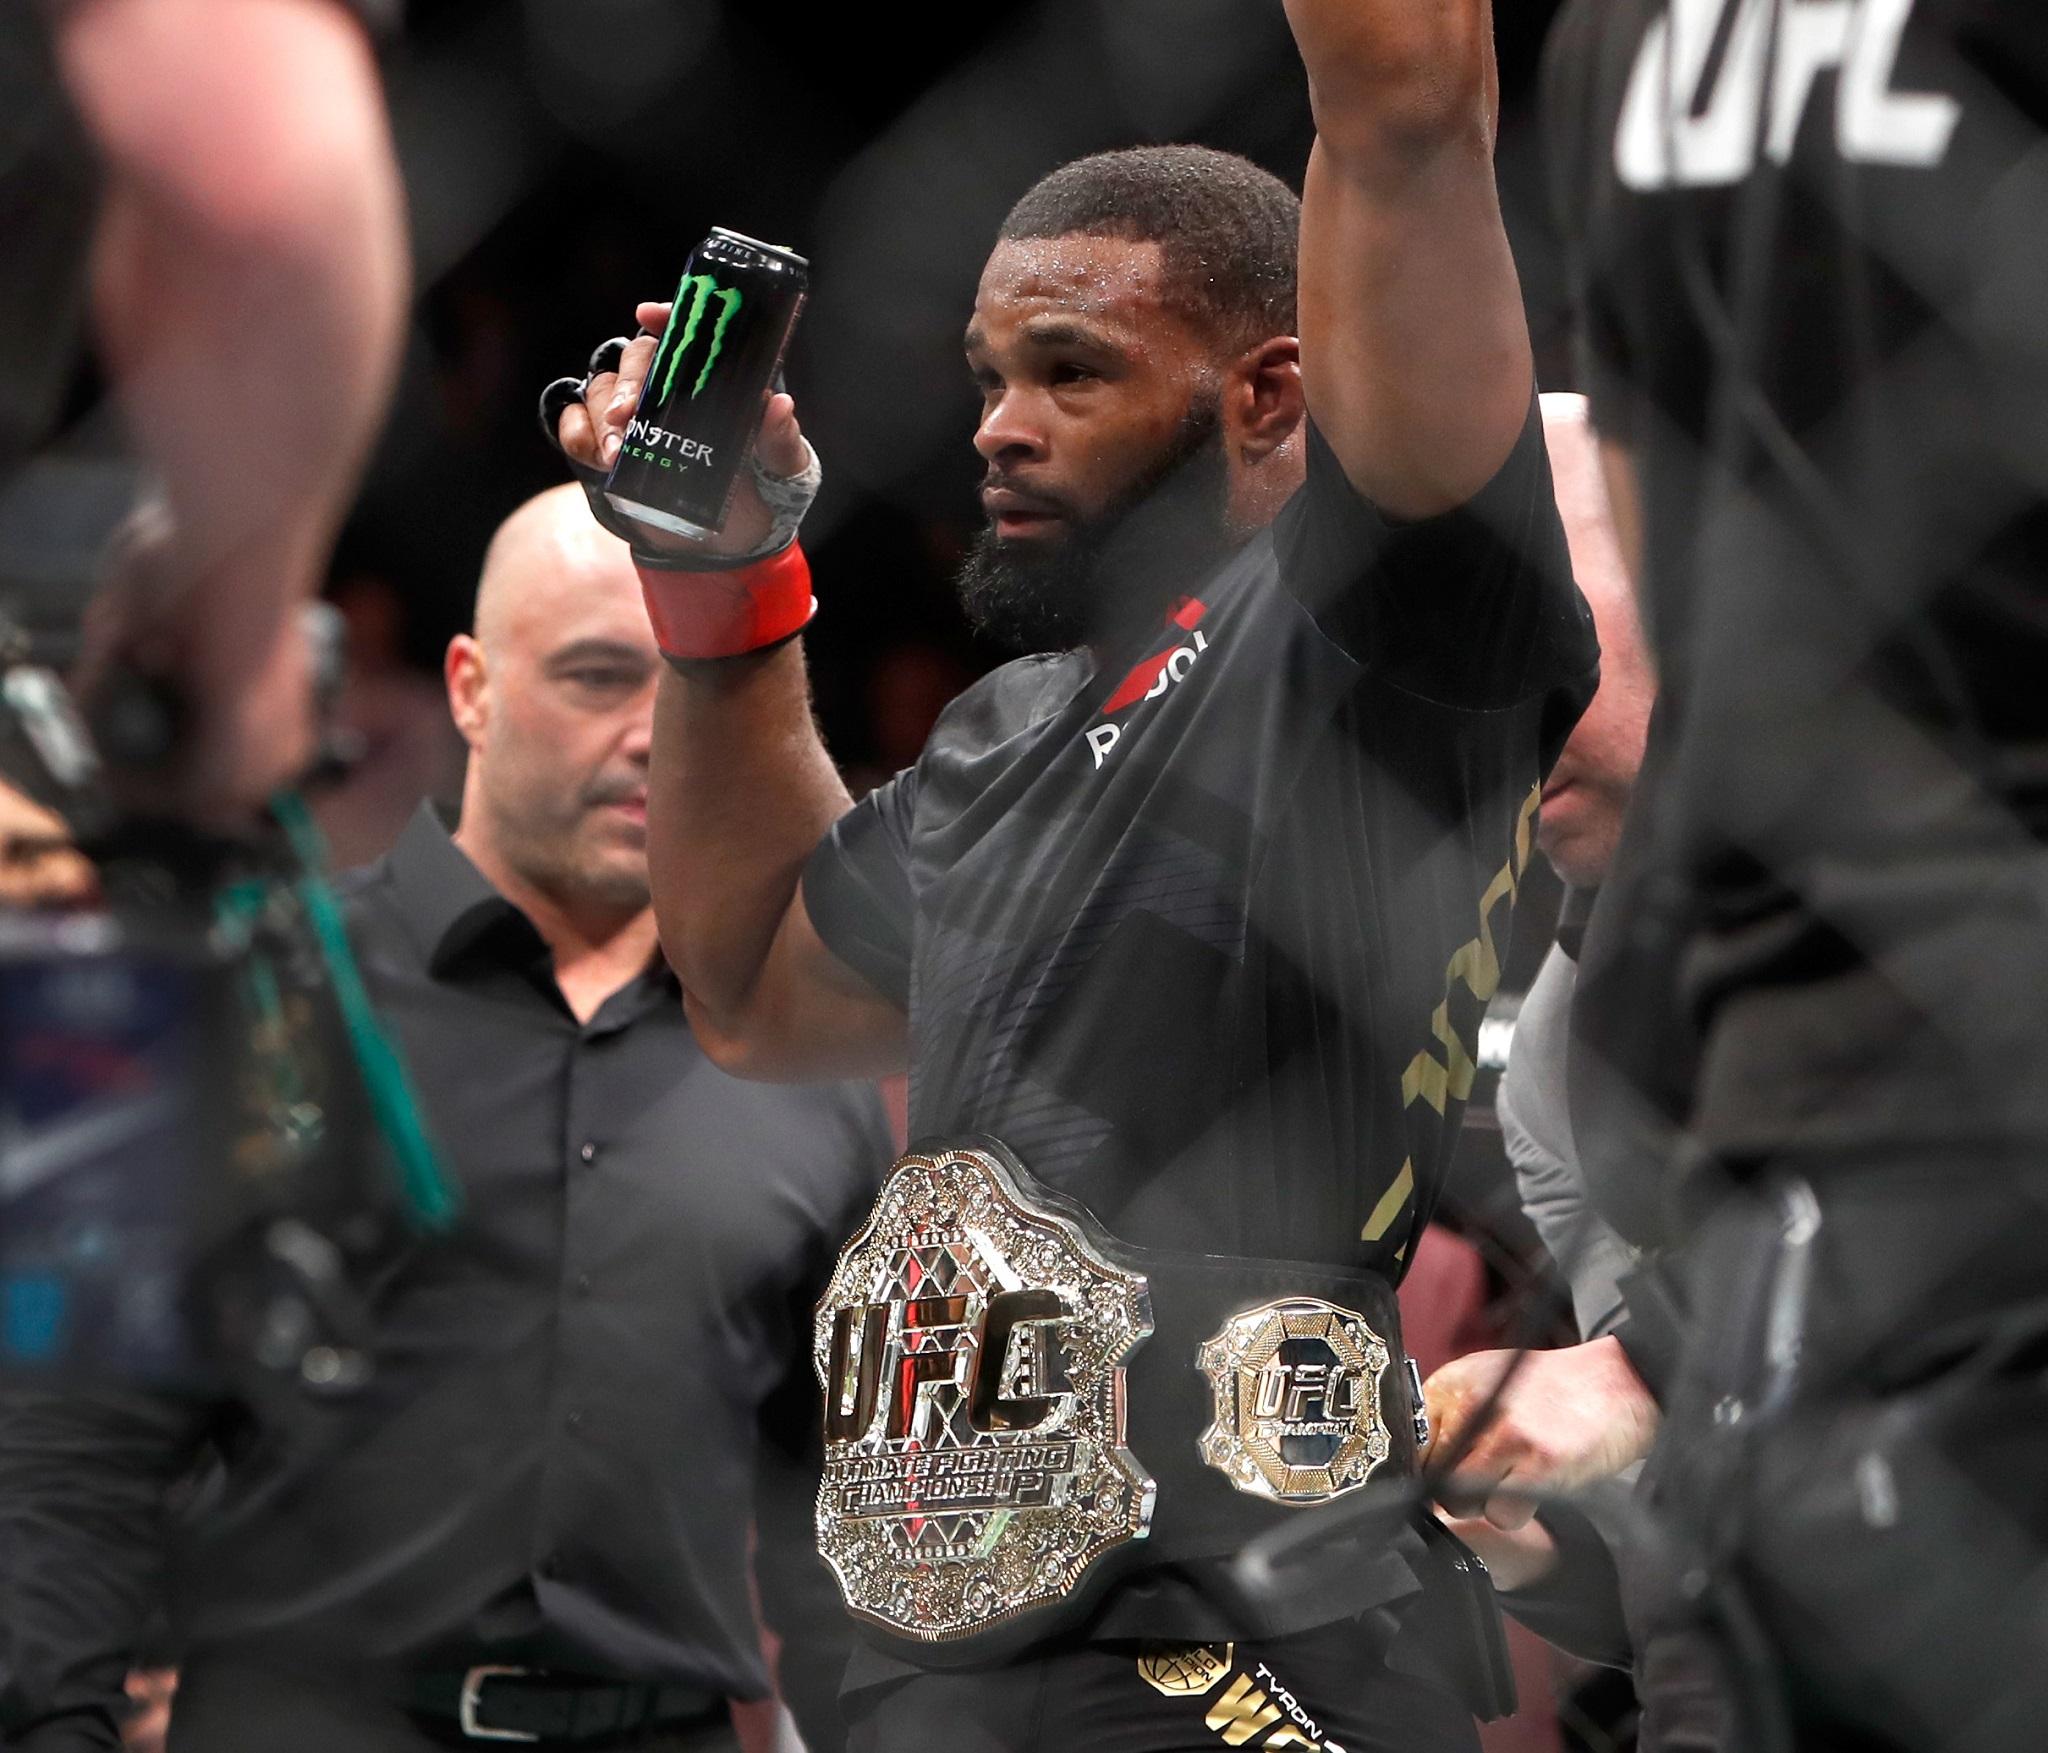 &#13;
Woodley celebrates retaining his welterweight title (Getty)&#13;